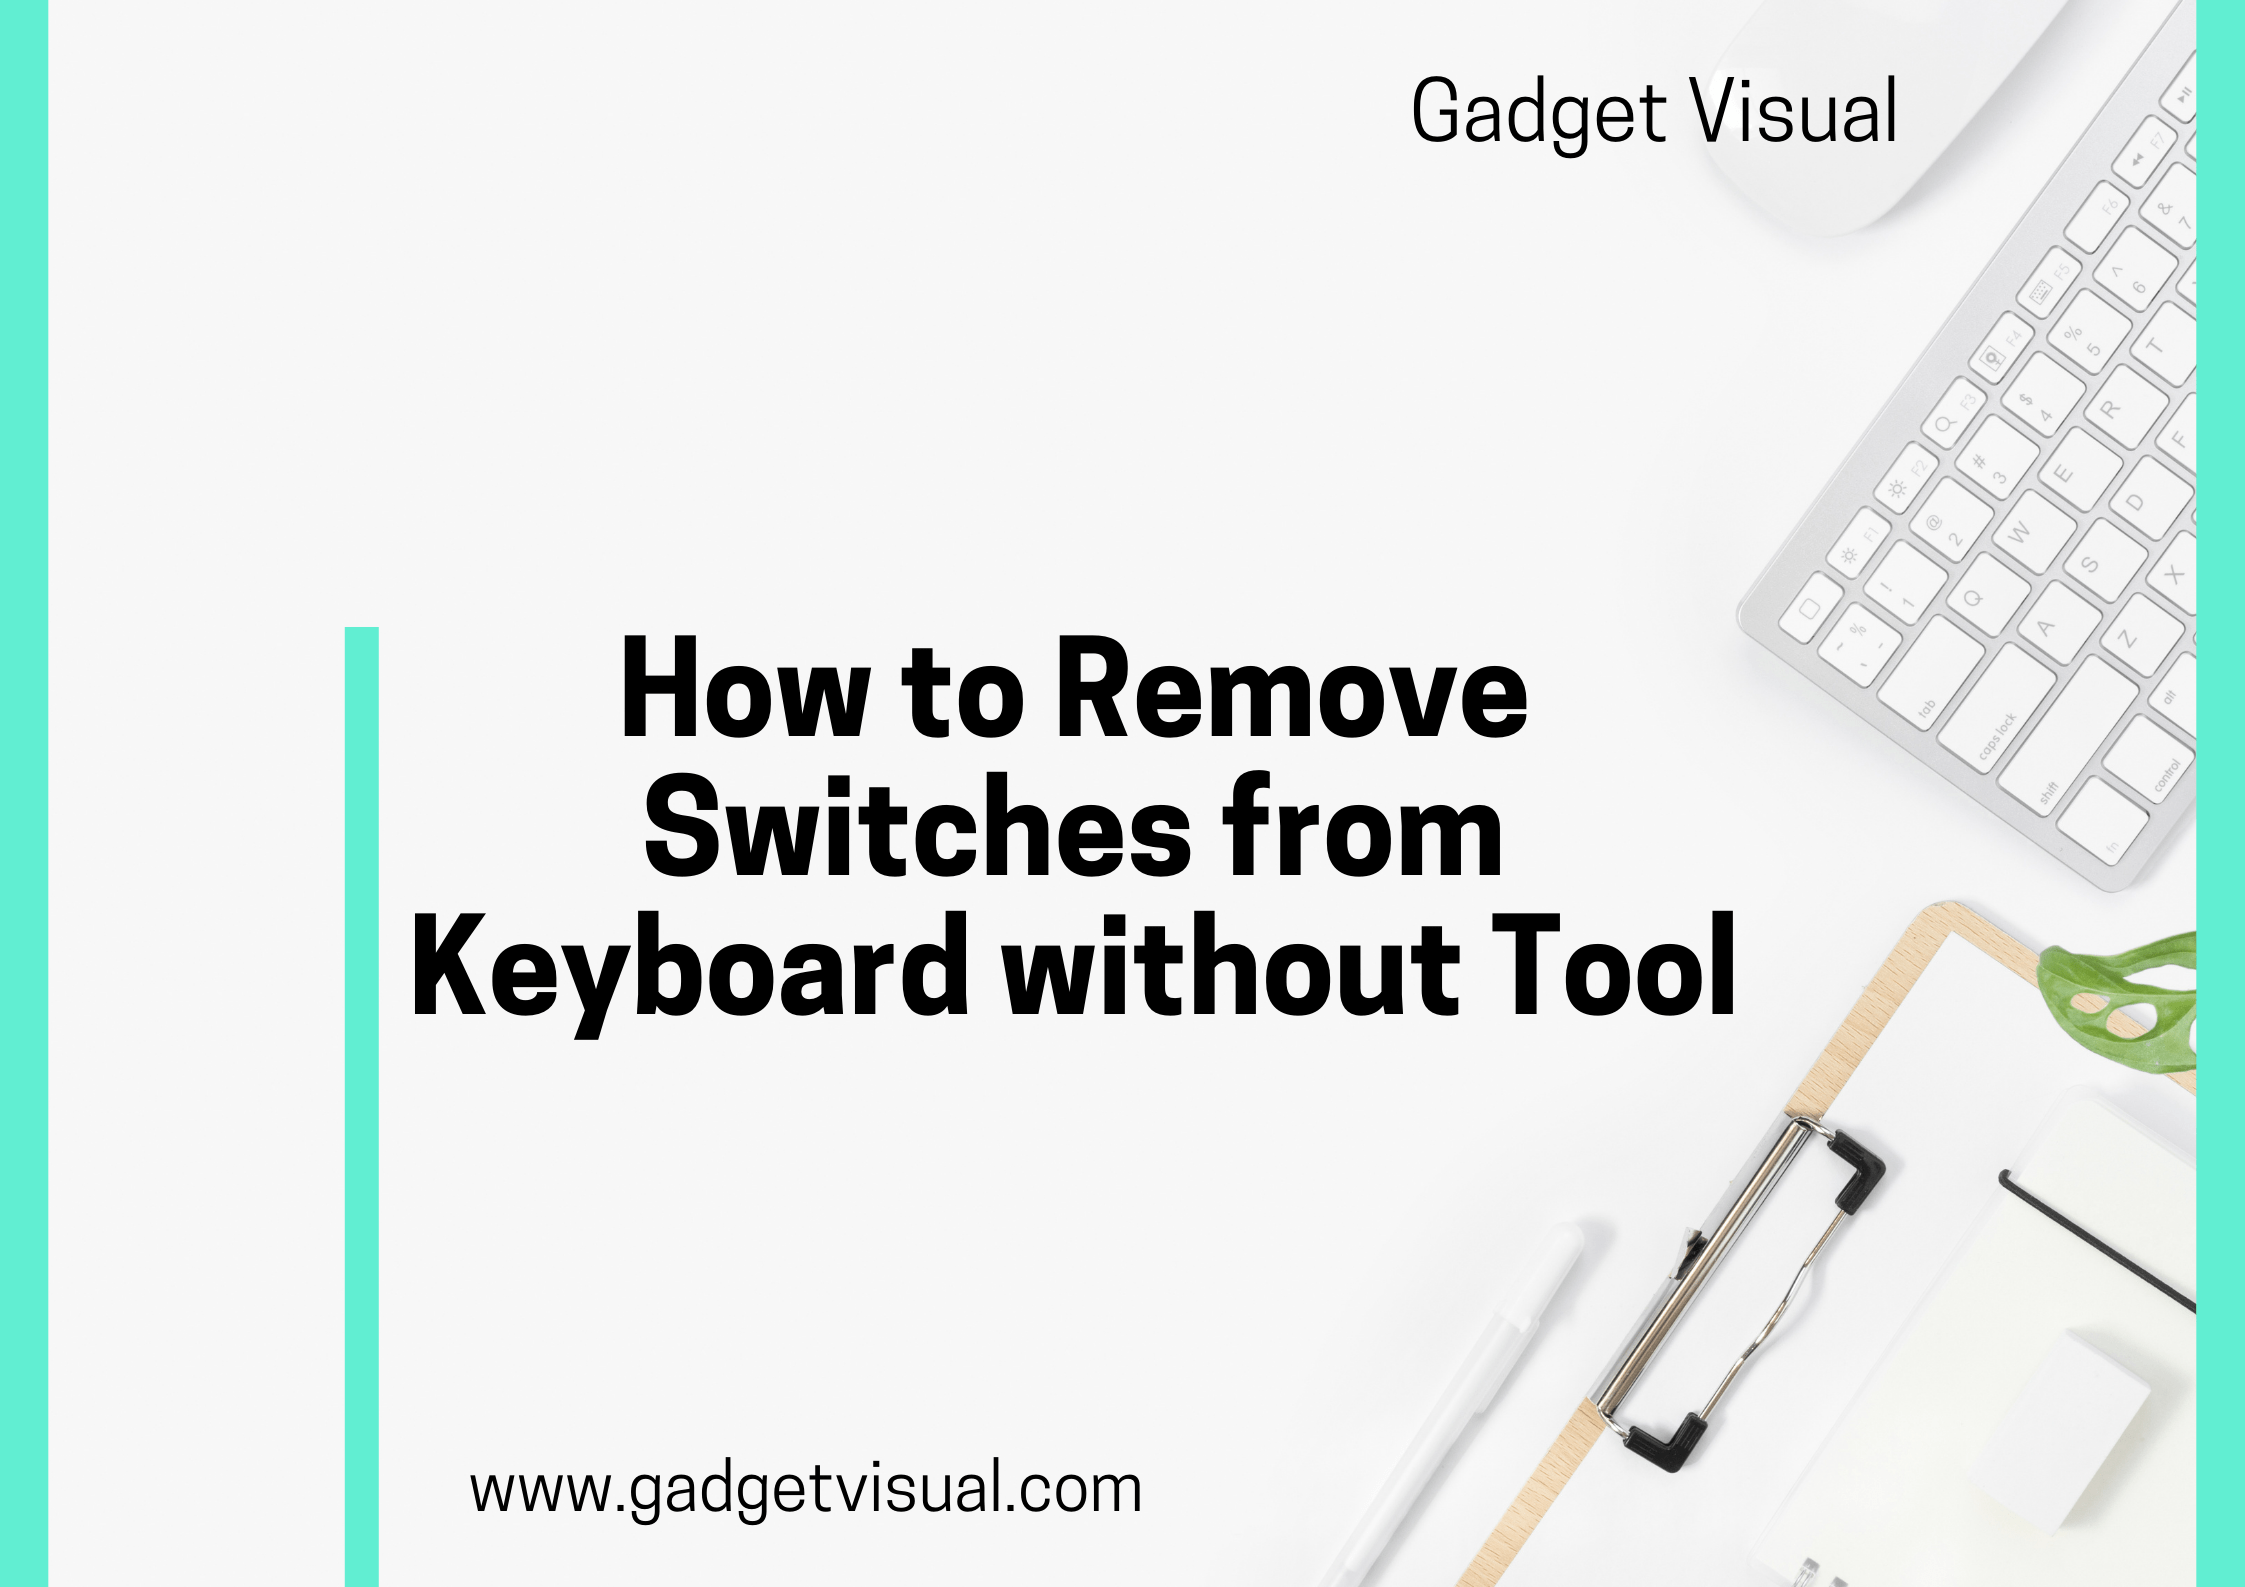 How to Remove Switches from Keyboard without Tool